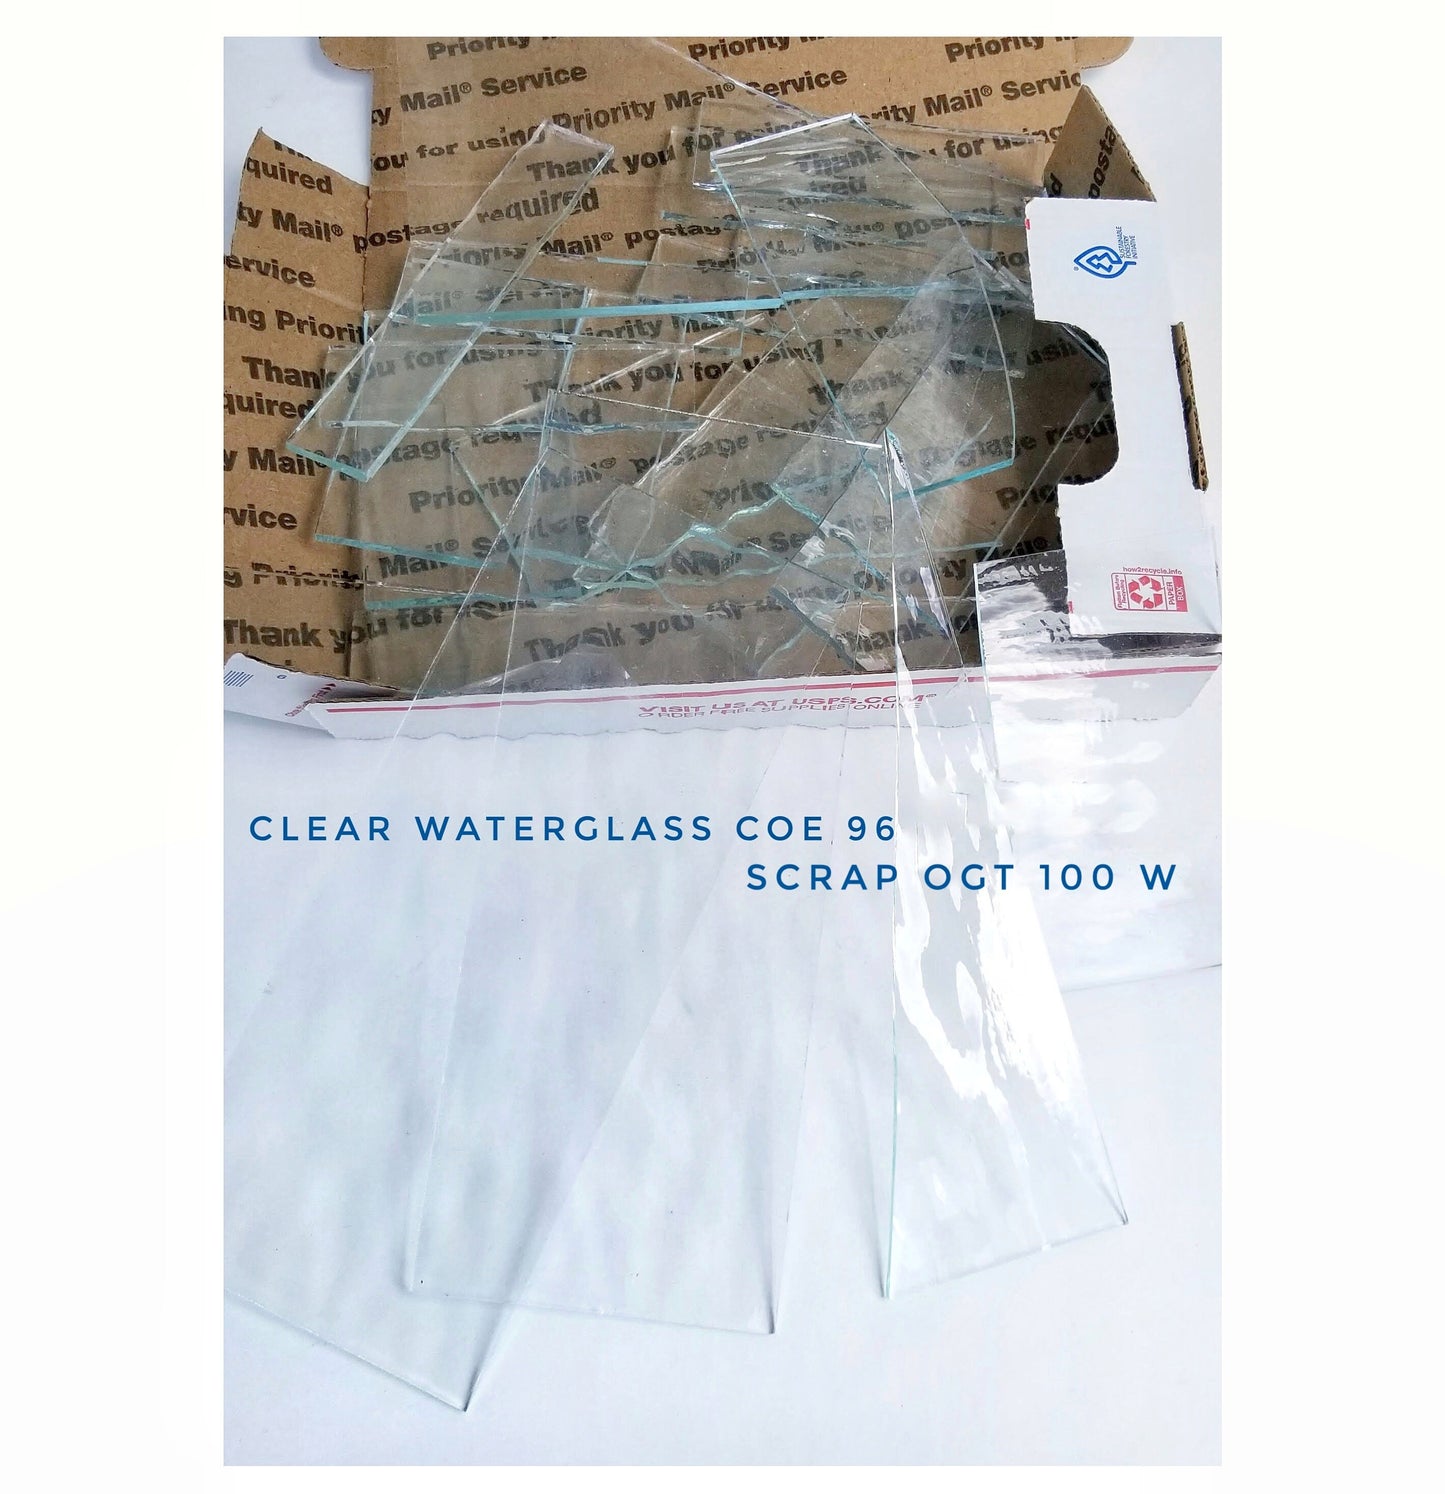 Oceanside Fusible Glass Pieces. Use for your Pot Melts, Microwave Kiln, Jewelry. Coe 96. Clear Waterglass Scrap, Small Sheets. 2 plus pounds